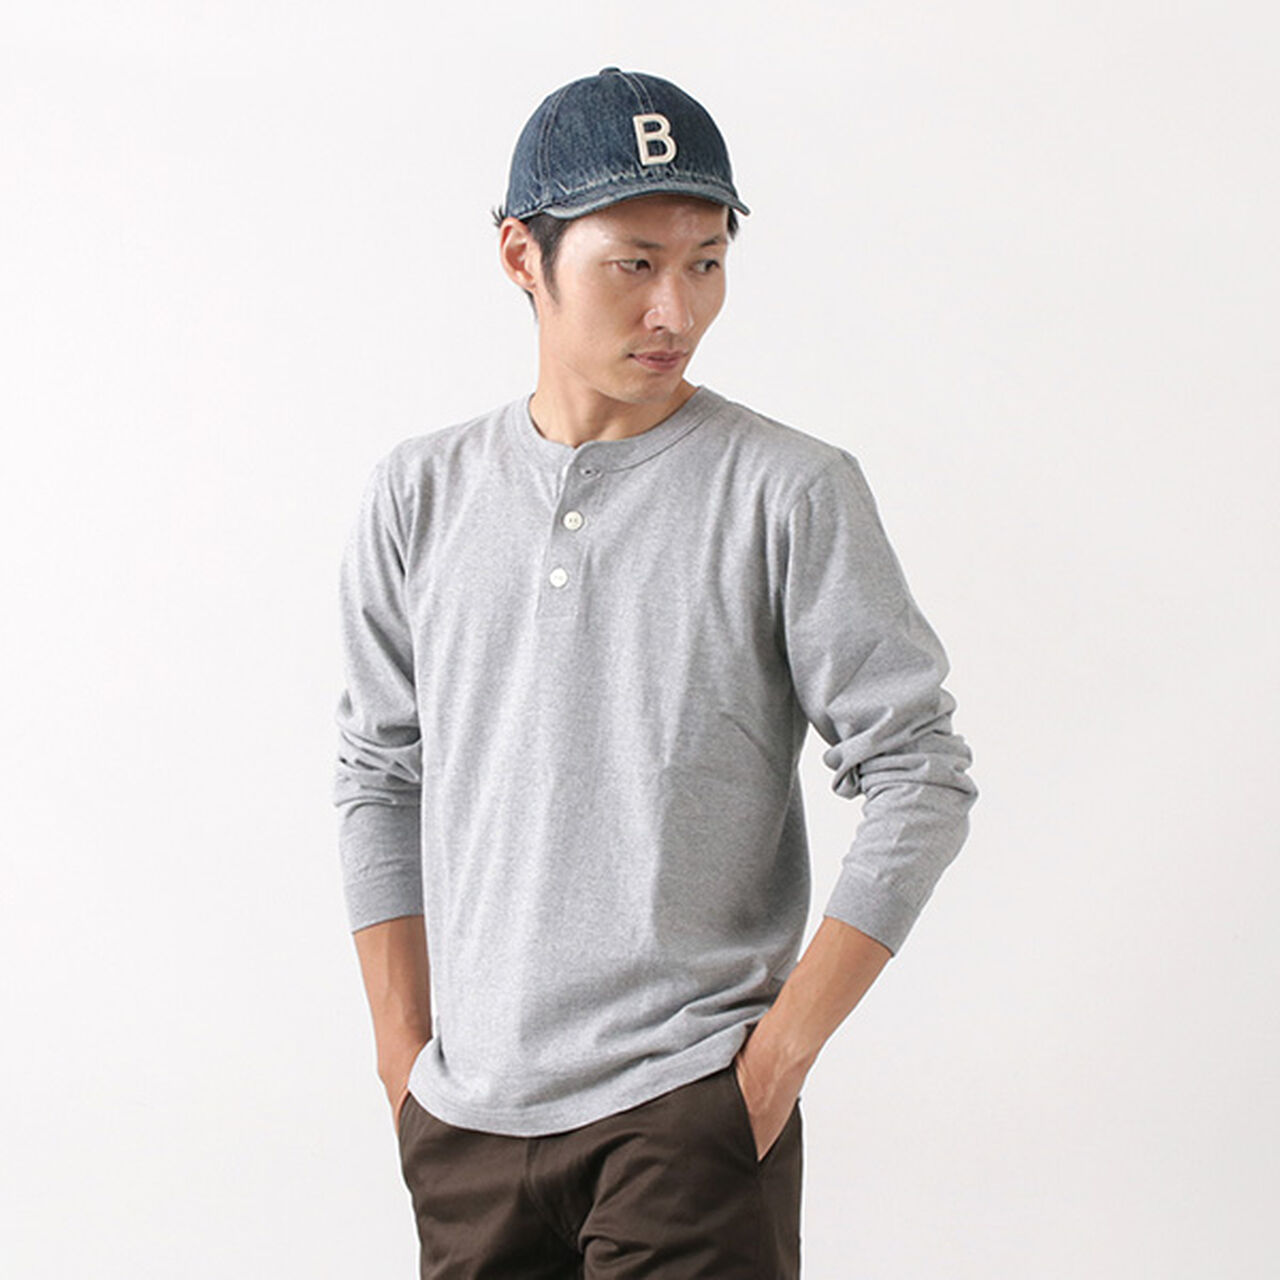 BR-3044 Small Knitted Henley Neck L/S T-shirt,Grey, large image number 0